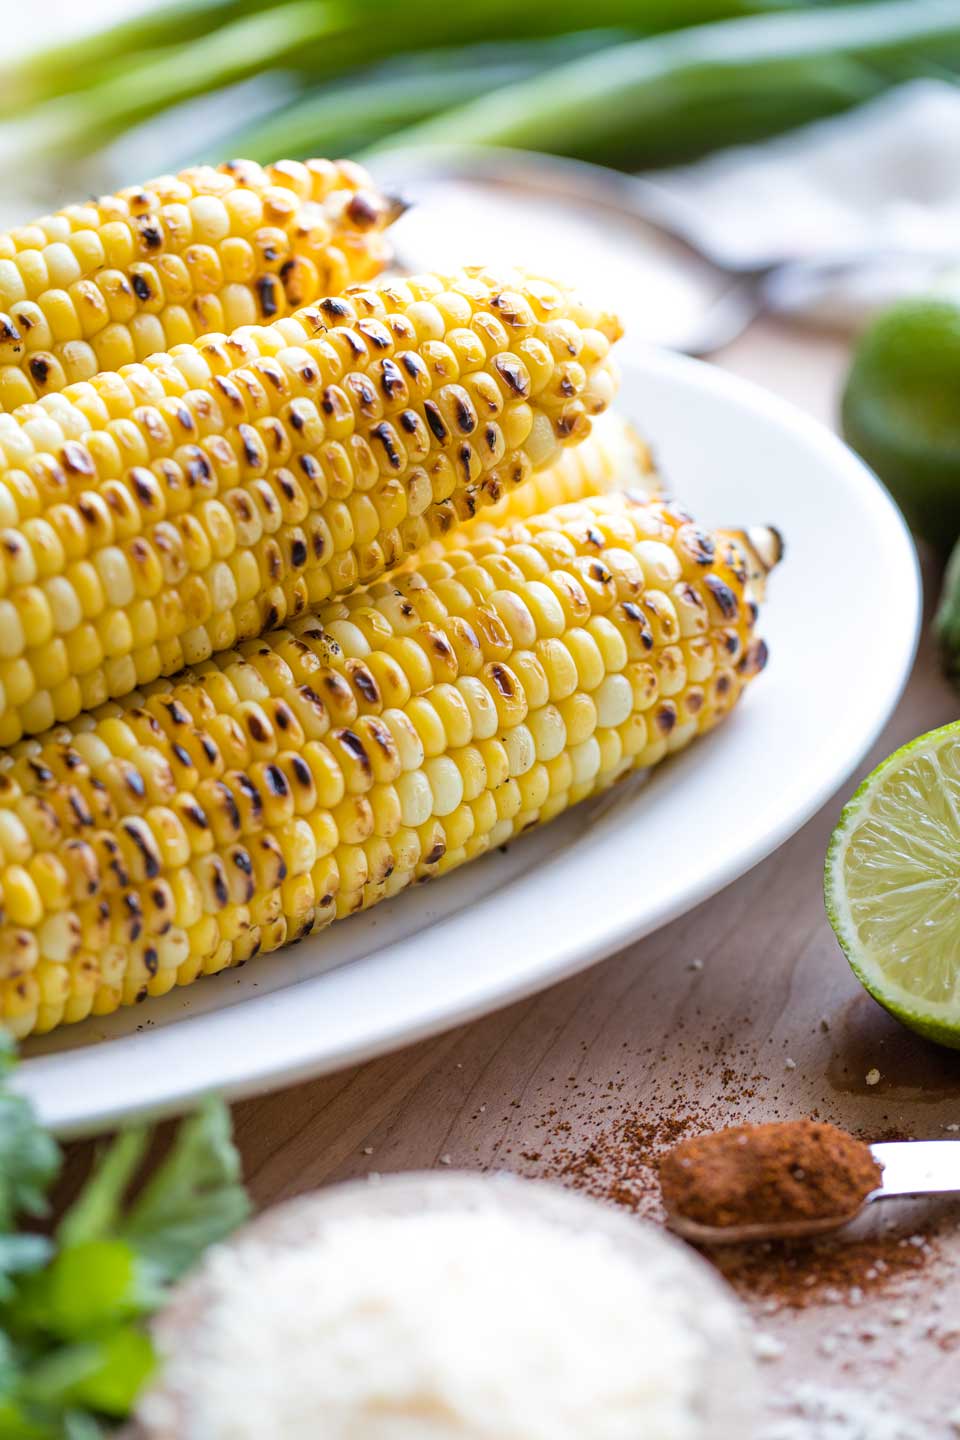 A pile of 4 or 5 ears of grilled corn on a white platter, surrounded by other ingredients for this Mexican Corn Salad, like cut limes, cilantro, green onions and a spoonful of chile powder..